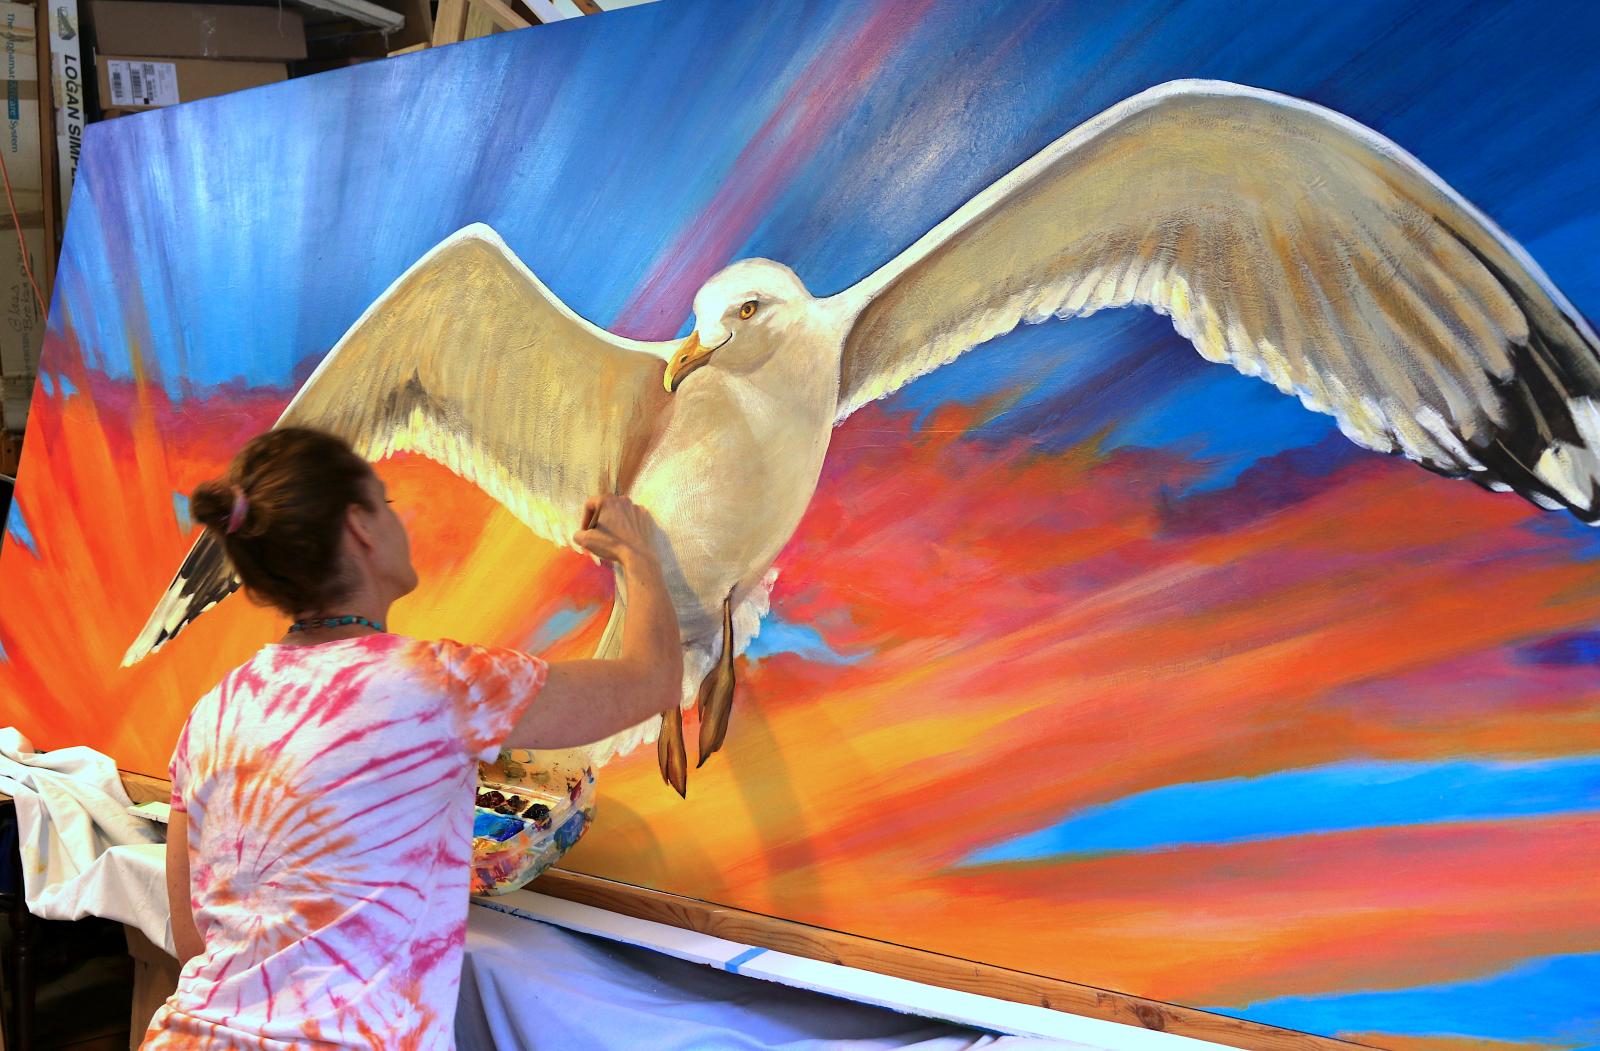 8 ft detail of the16ft x 38 ft wall - Arts in Education Residency Mural - 3 months, 592 students then completed by Gayle Mangan Kassal - the mural highlights the school's mascot: the seagull and it's surroundings and creatures the students want to protect, from monarchs to terrapins.